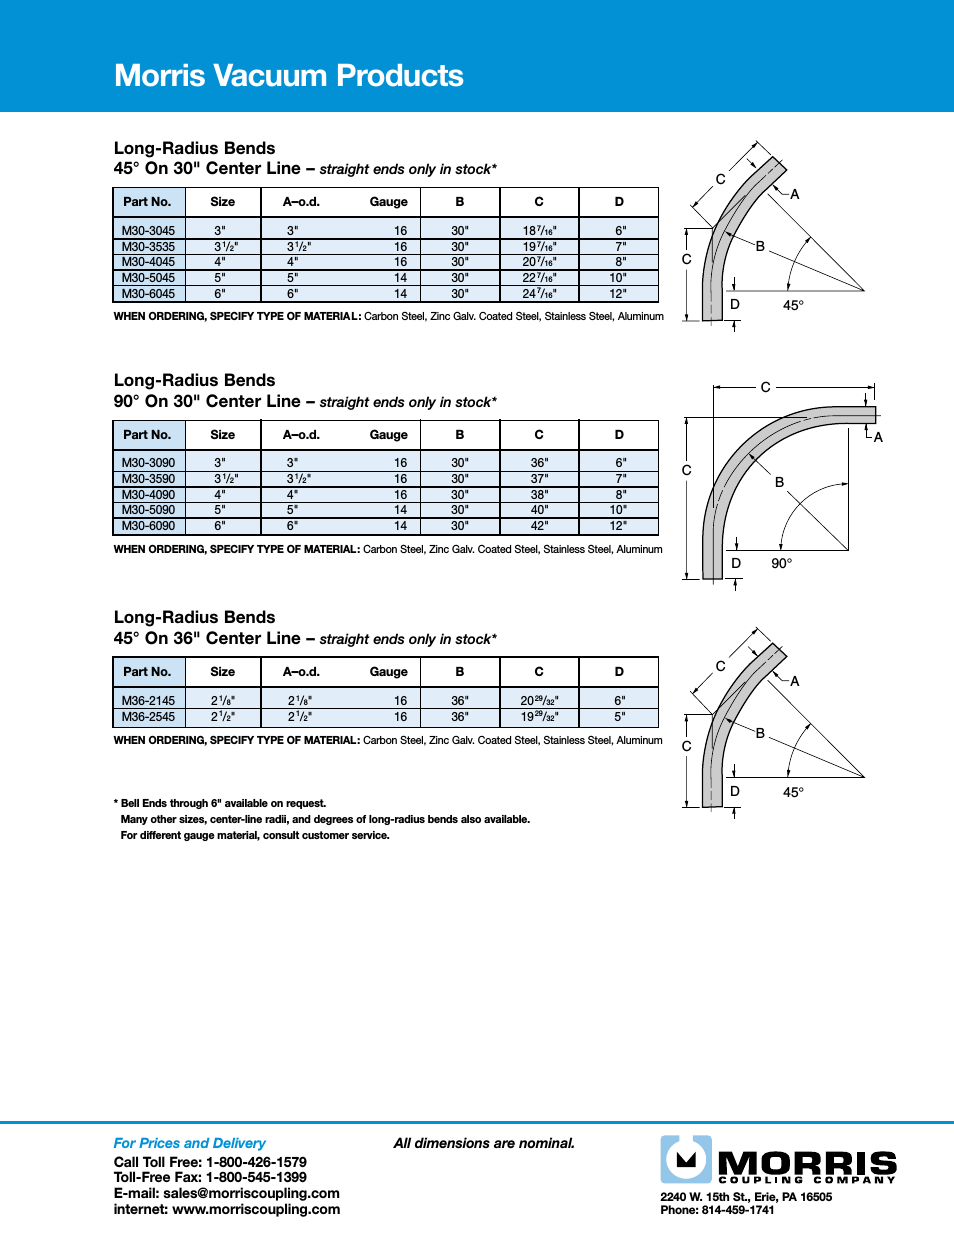 Vacuum Products - Long-Radius Bends 45 On 30 Center Line